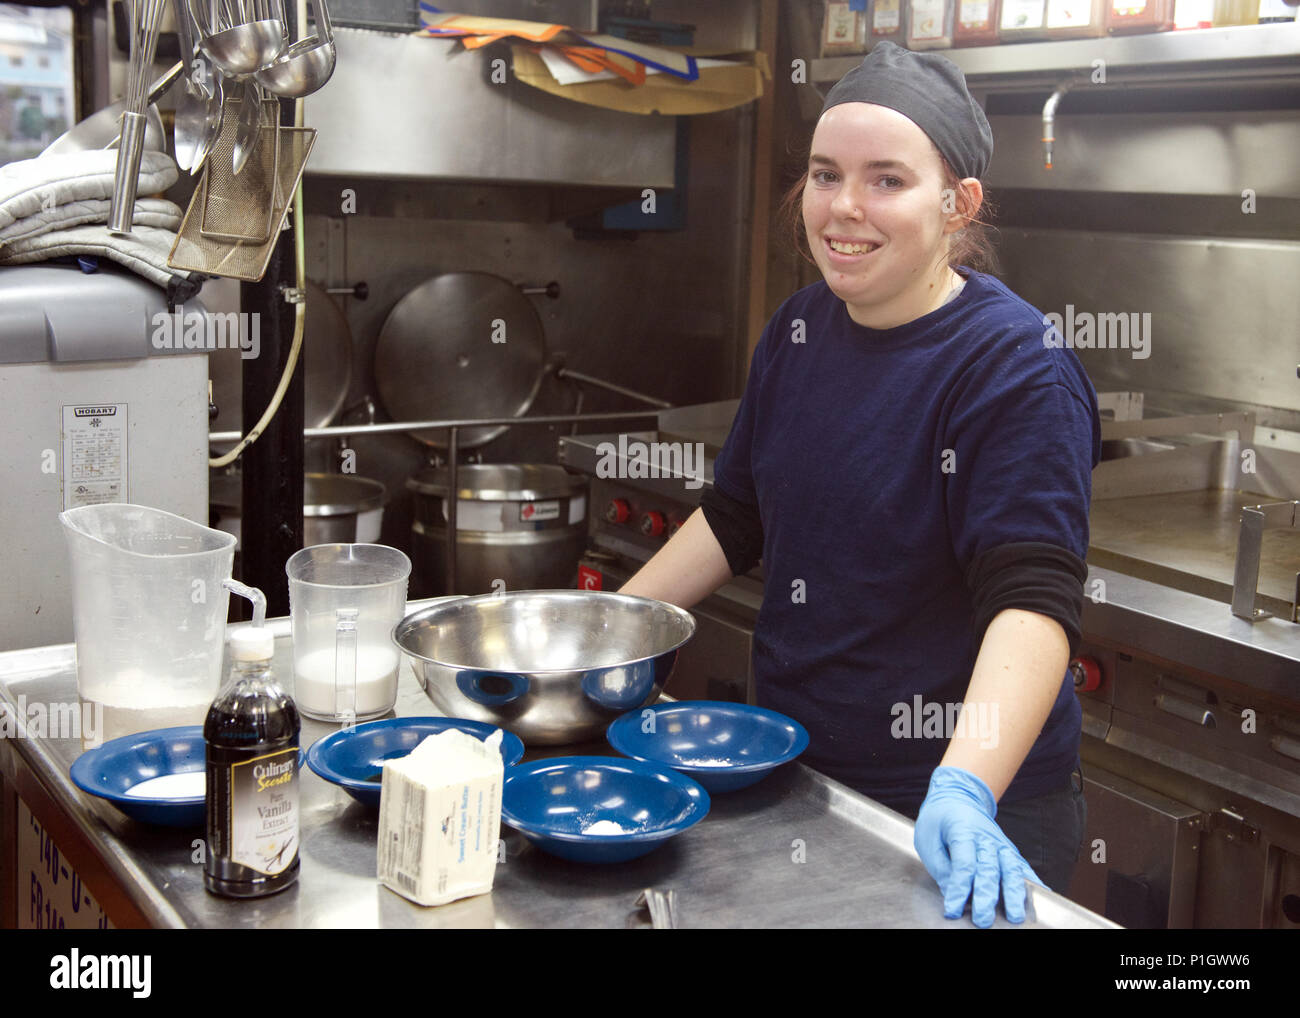 Mandy Lynn, a student at the Tongue Point Job Corps center in Astoria, Ore., works in the galley of the Coast Guard Cutter Steadfast also homeported in Astoria, Oct. 13, 2016. As part of her education, Mandy is working with Coast Guard cooks to learn different culinary techniques and styles. U.S. Coast Guard photo by Petty Officer 3rd Class Jonathan Klingenberg. Stock Photo